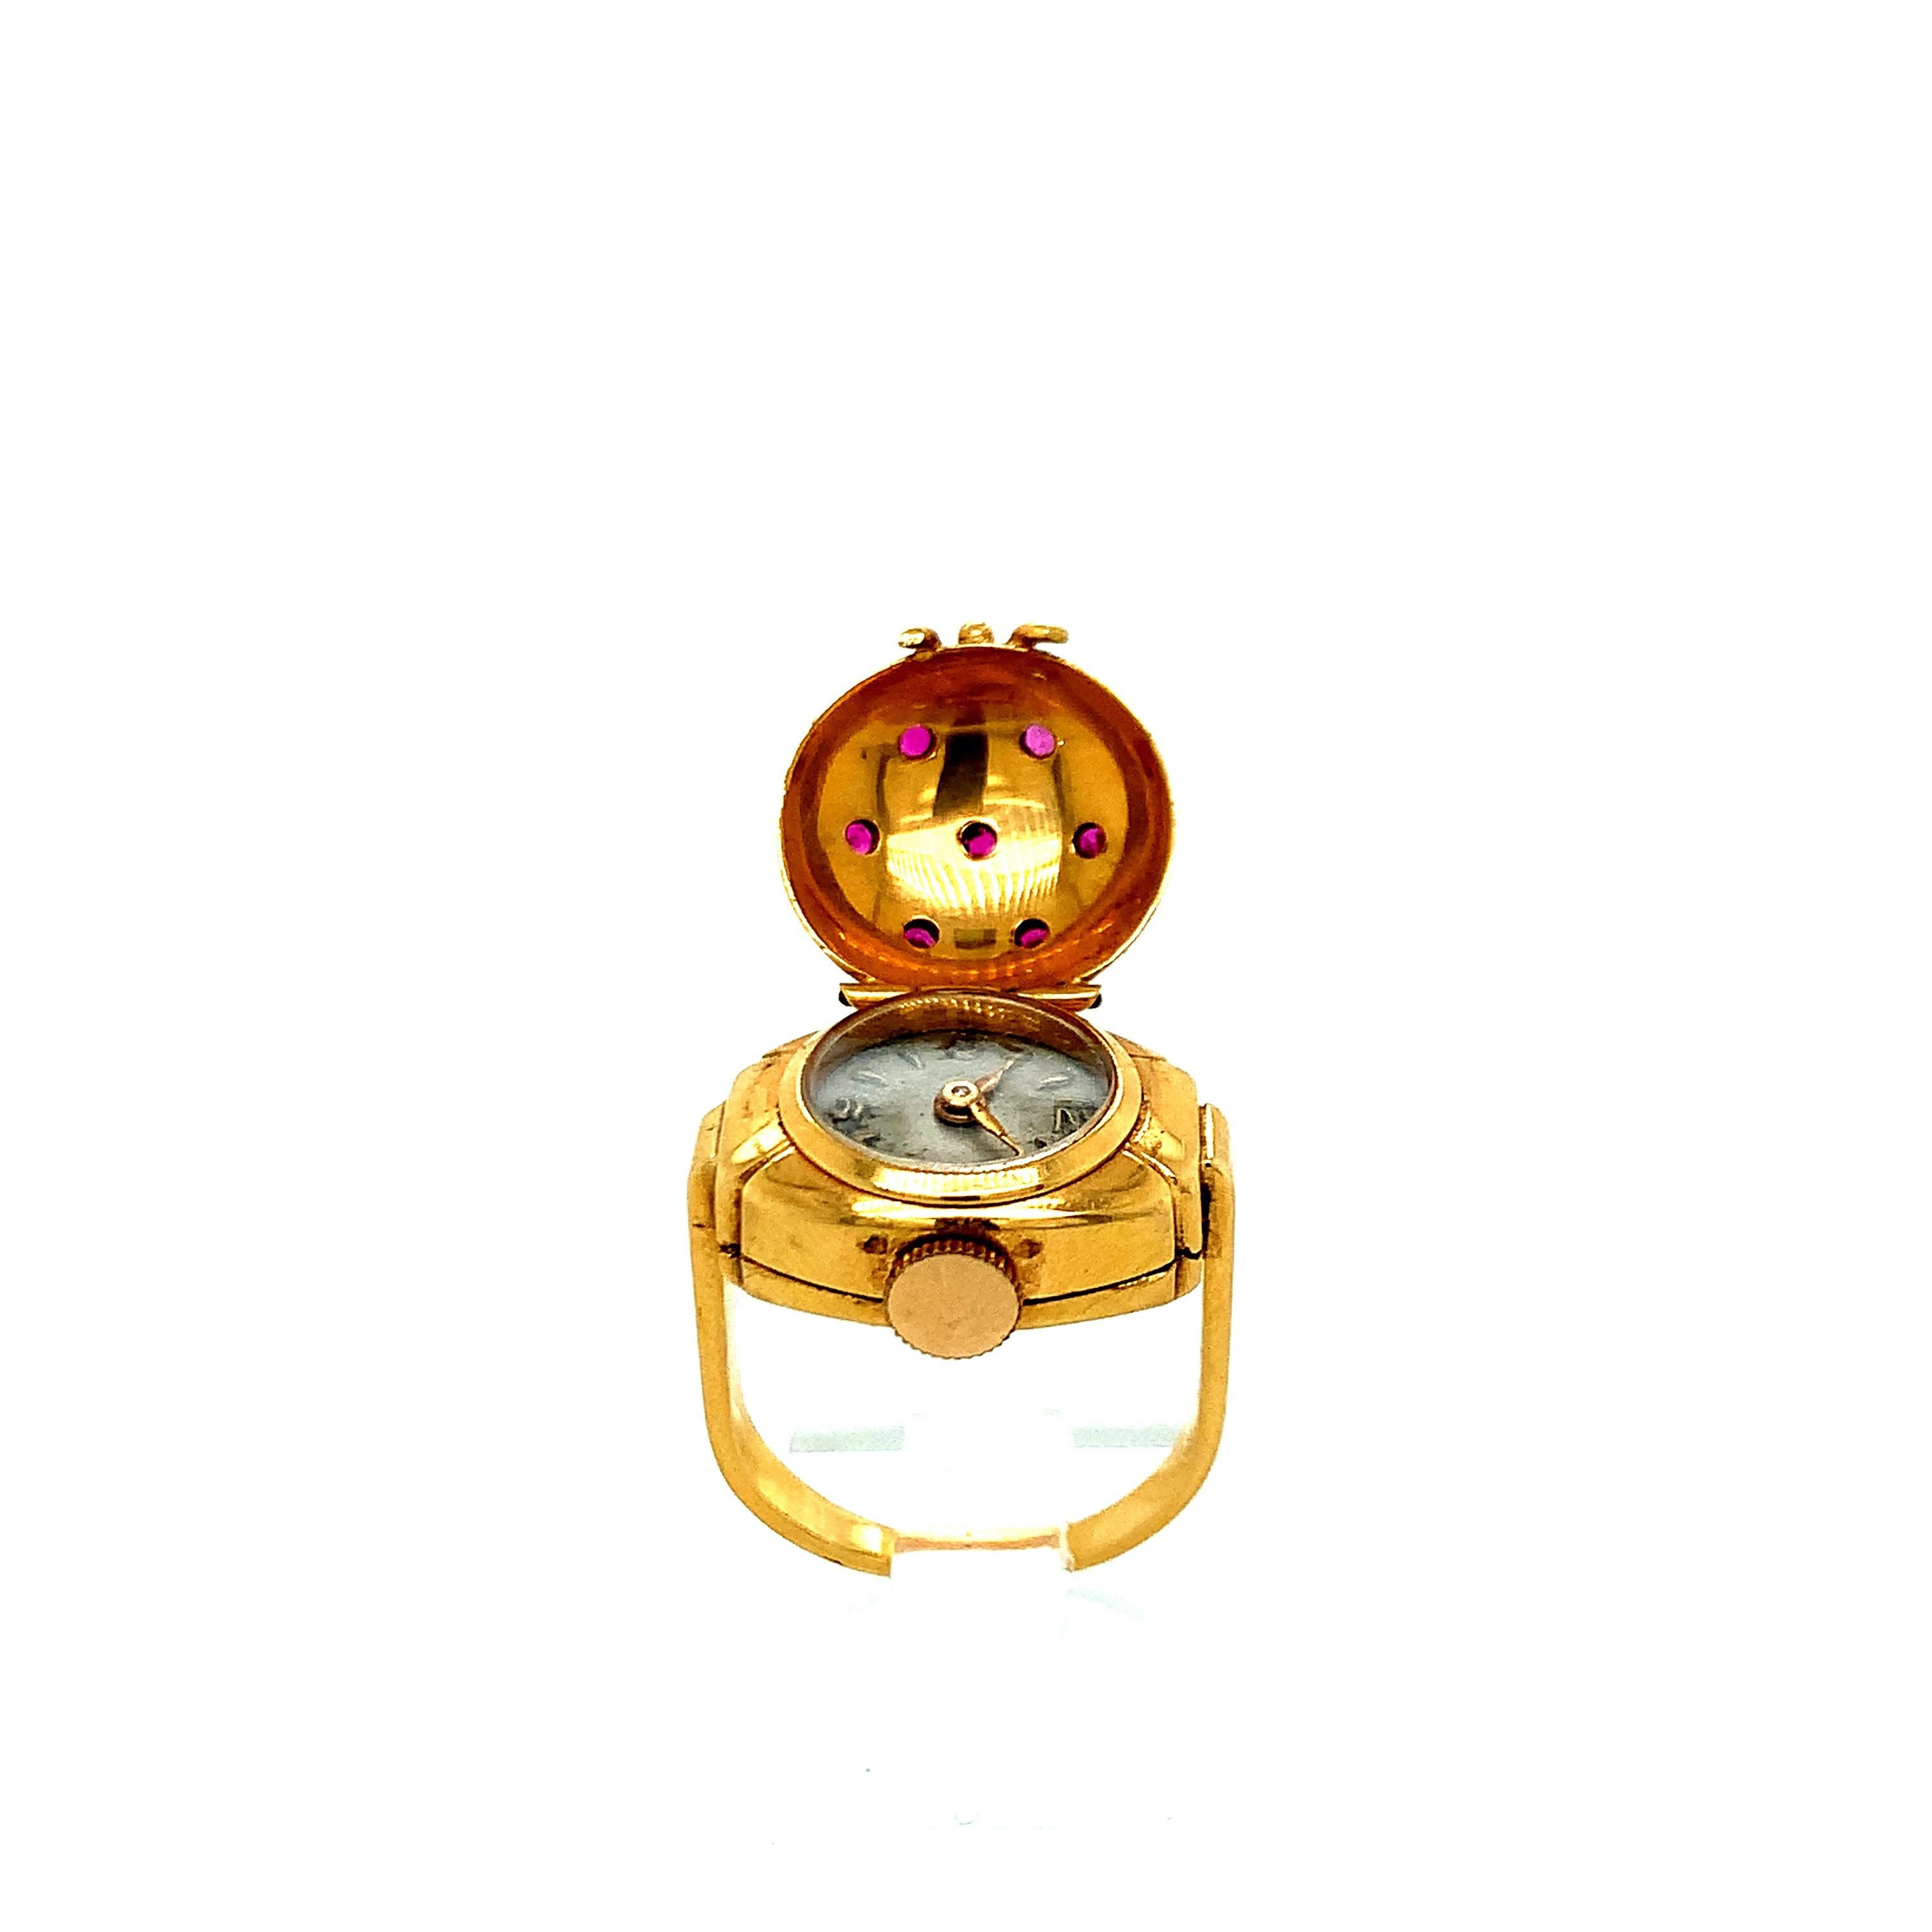 An 18 karat yellow gold covered watch ring with seven round rubies. A watch appears when the top of the ring is opened. Stamped 59829. Total weight 10.1 grams. Size 4.25.